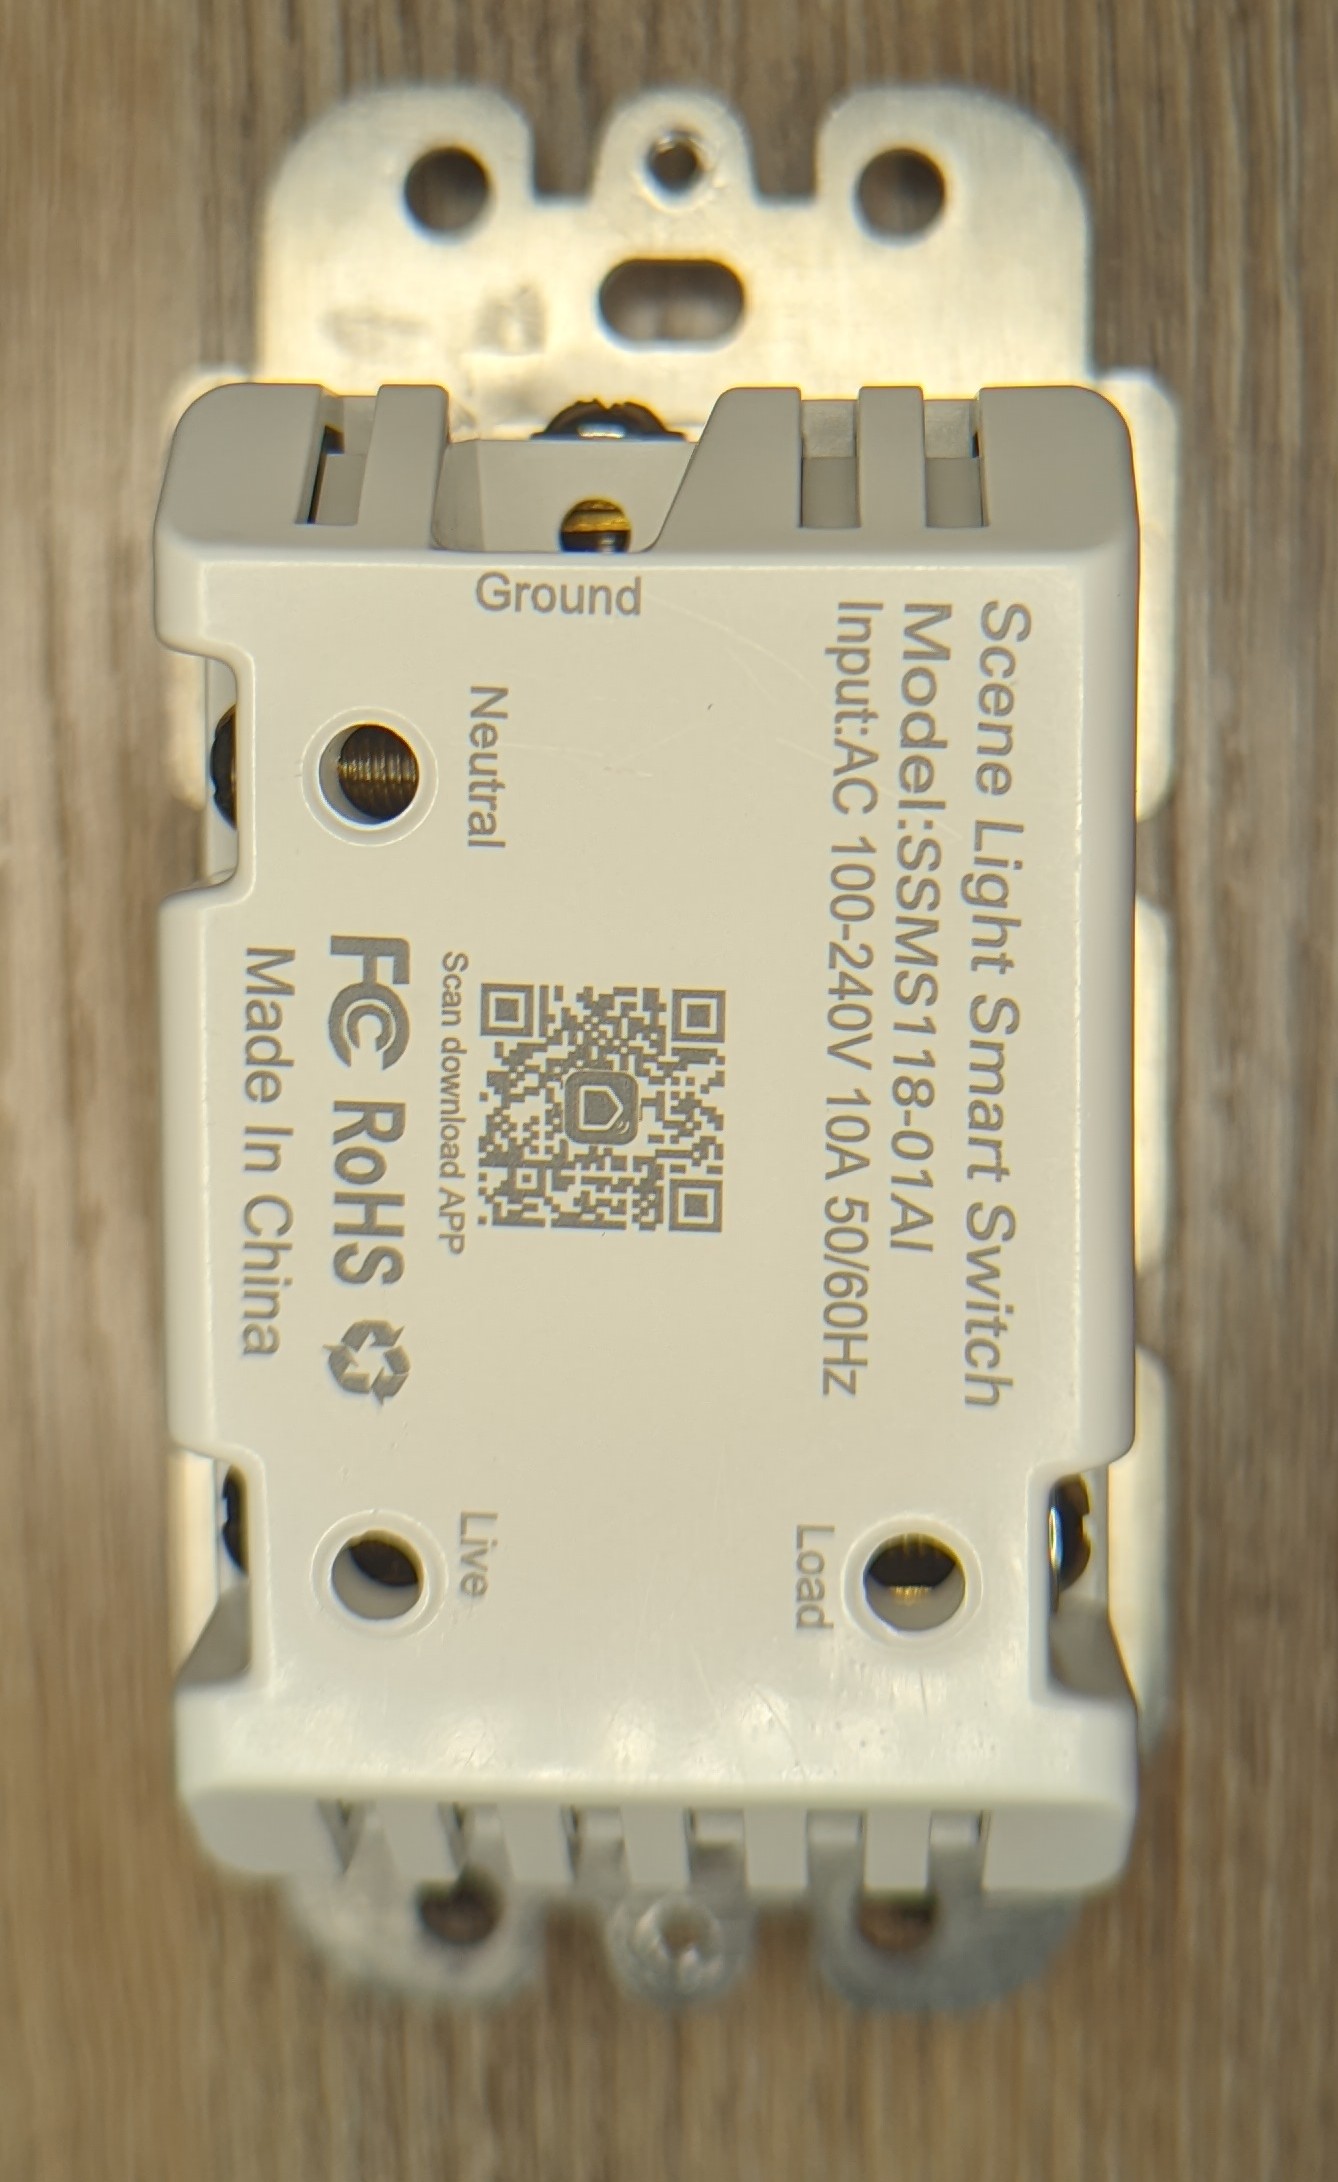 Picture of the switch lying on its front so the rear is visible. Product model number and other details are visible. No screws or other evidence that entry is gained from the rear.